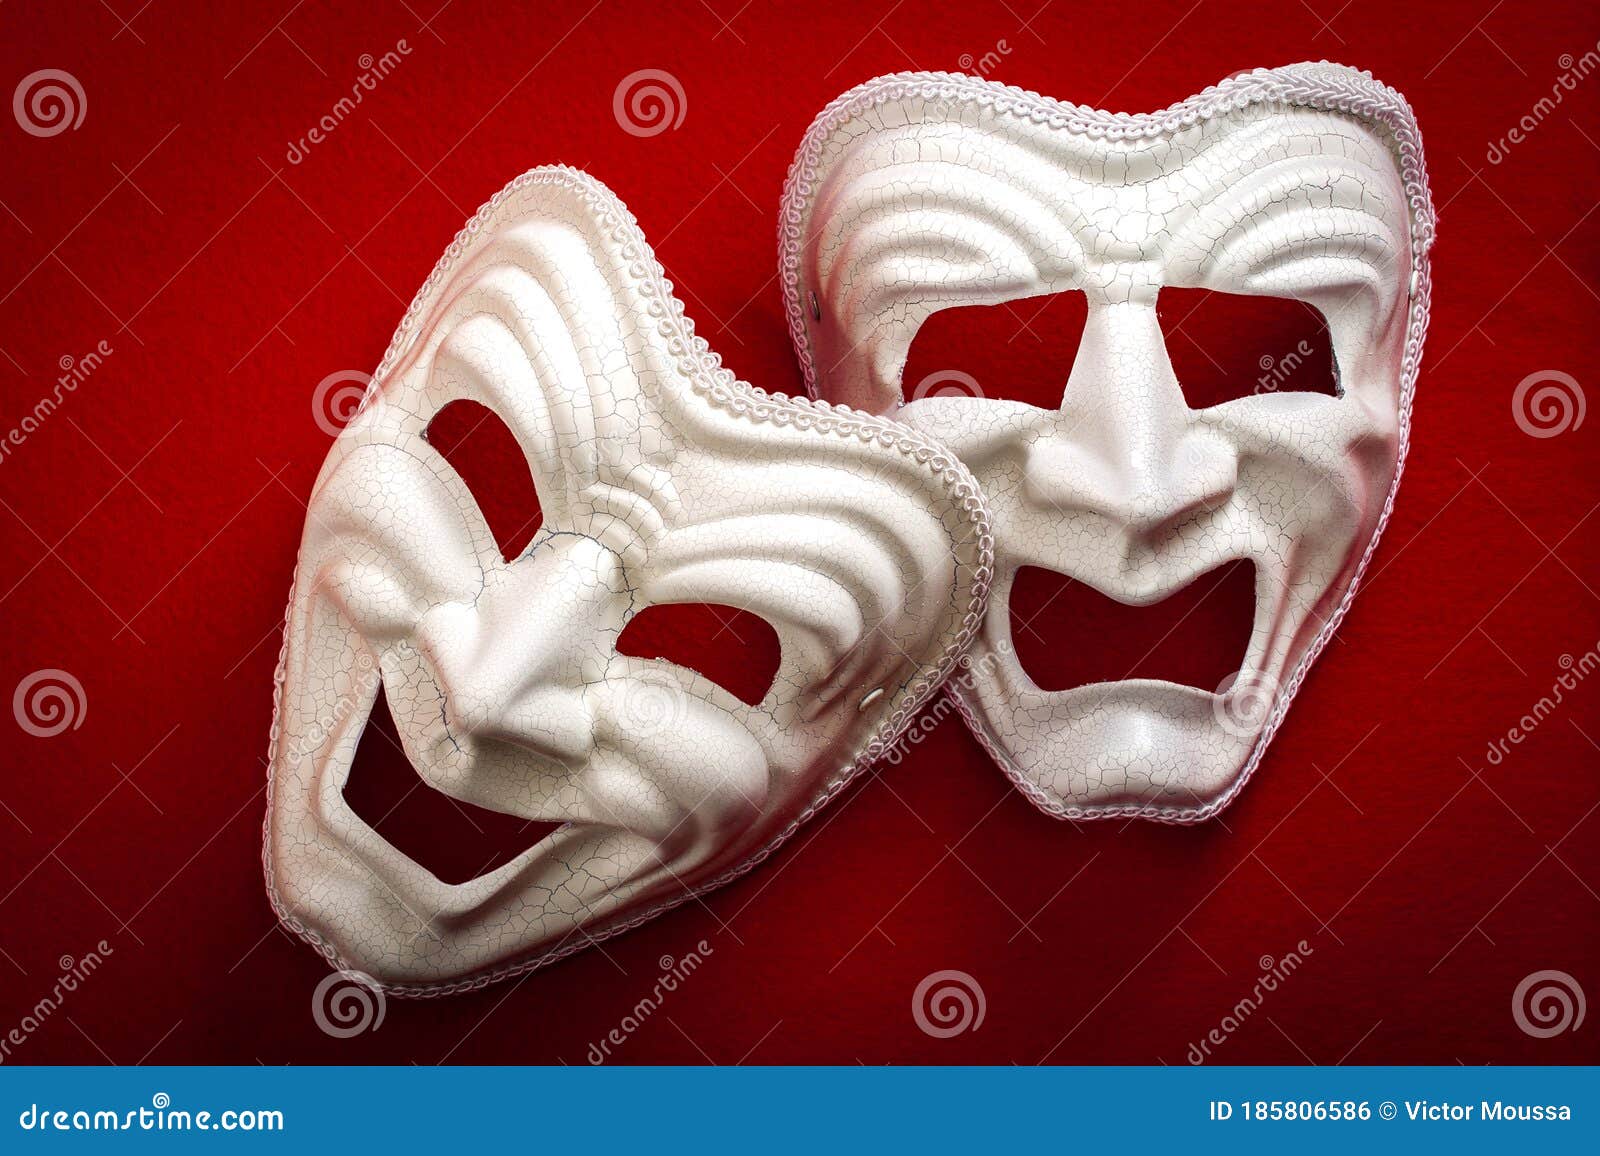 comedy and tragedy theatrical mask  on a red background